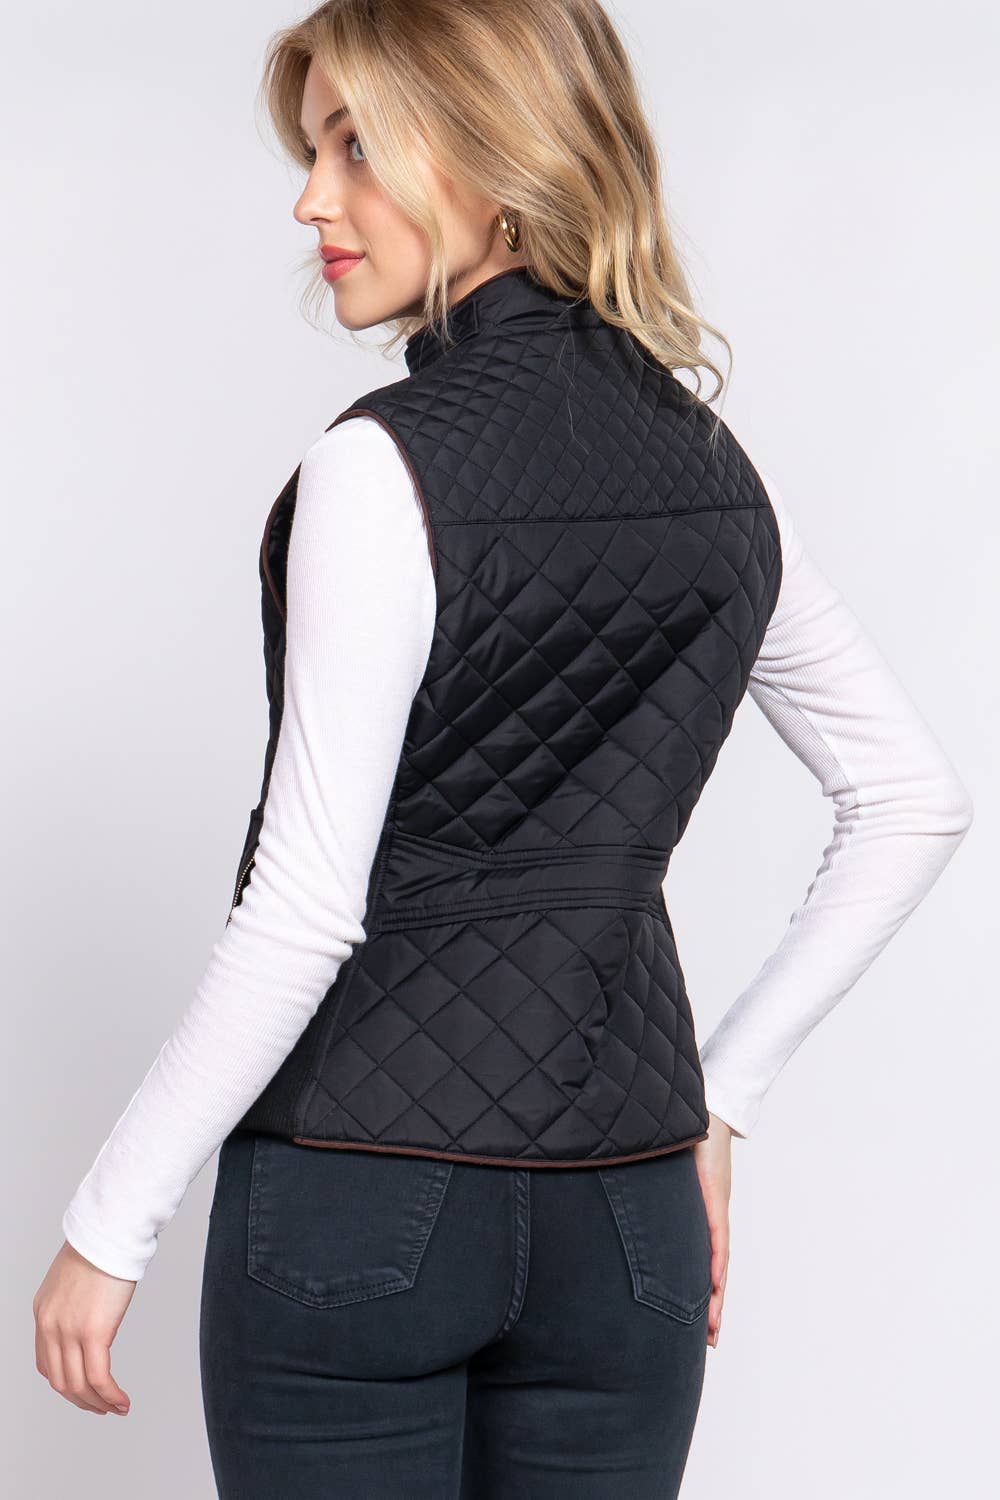 ..SC155345 SLIM FIT SUEDE PIPING QUILTED PADDING VEST: BLK-black-155345